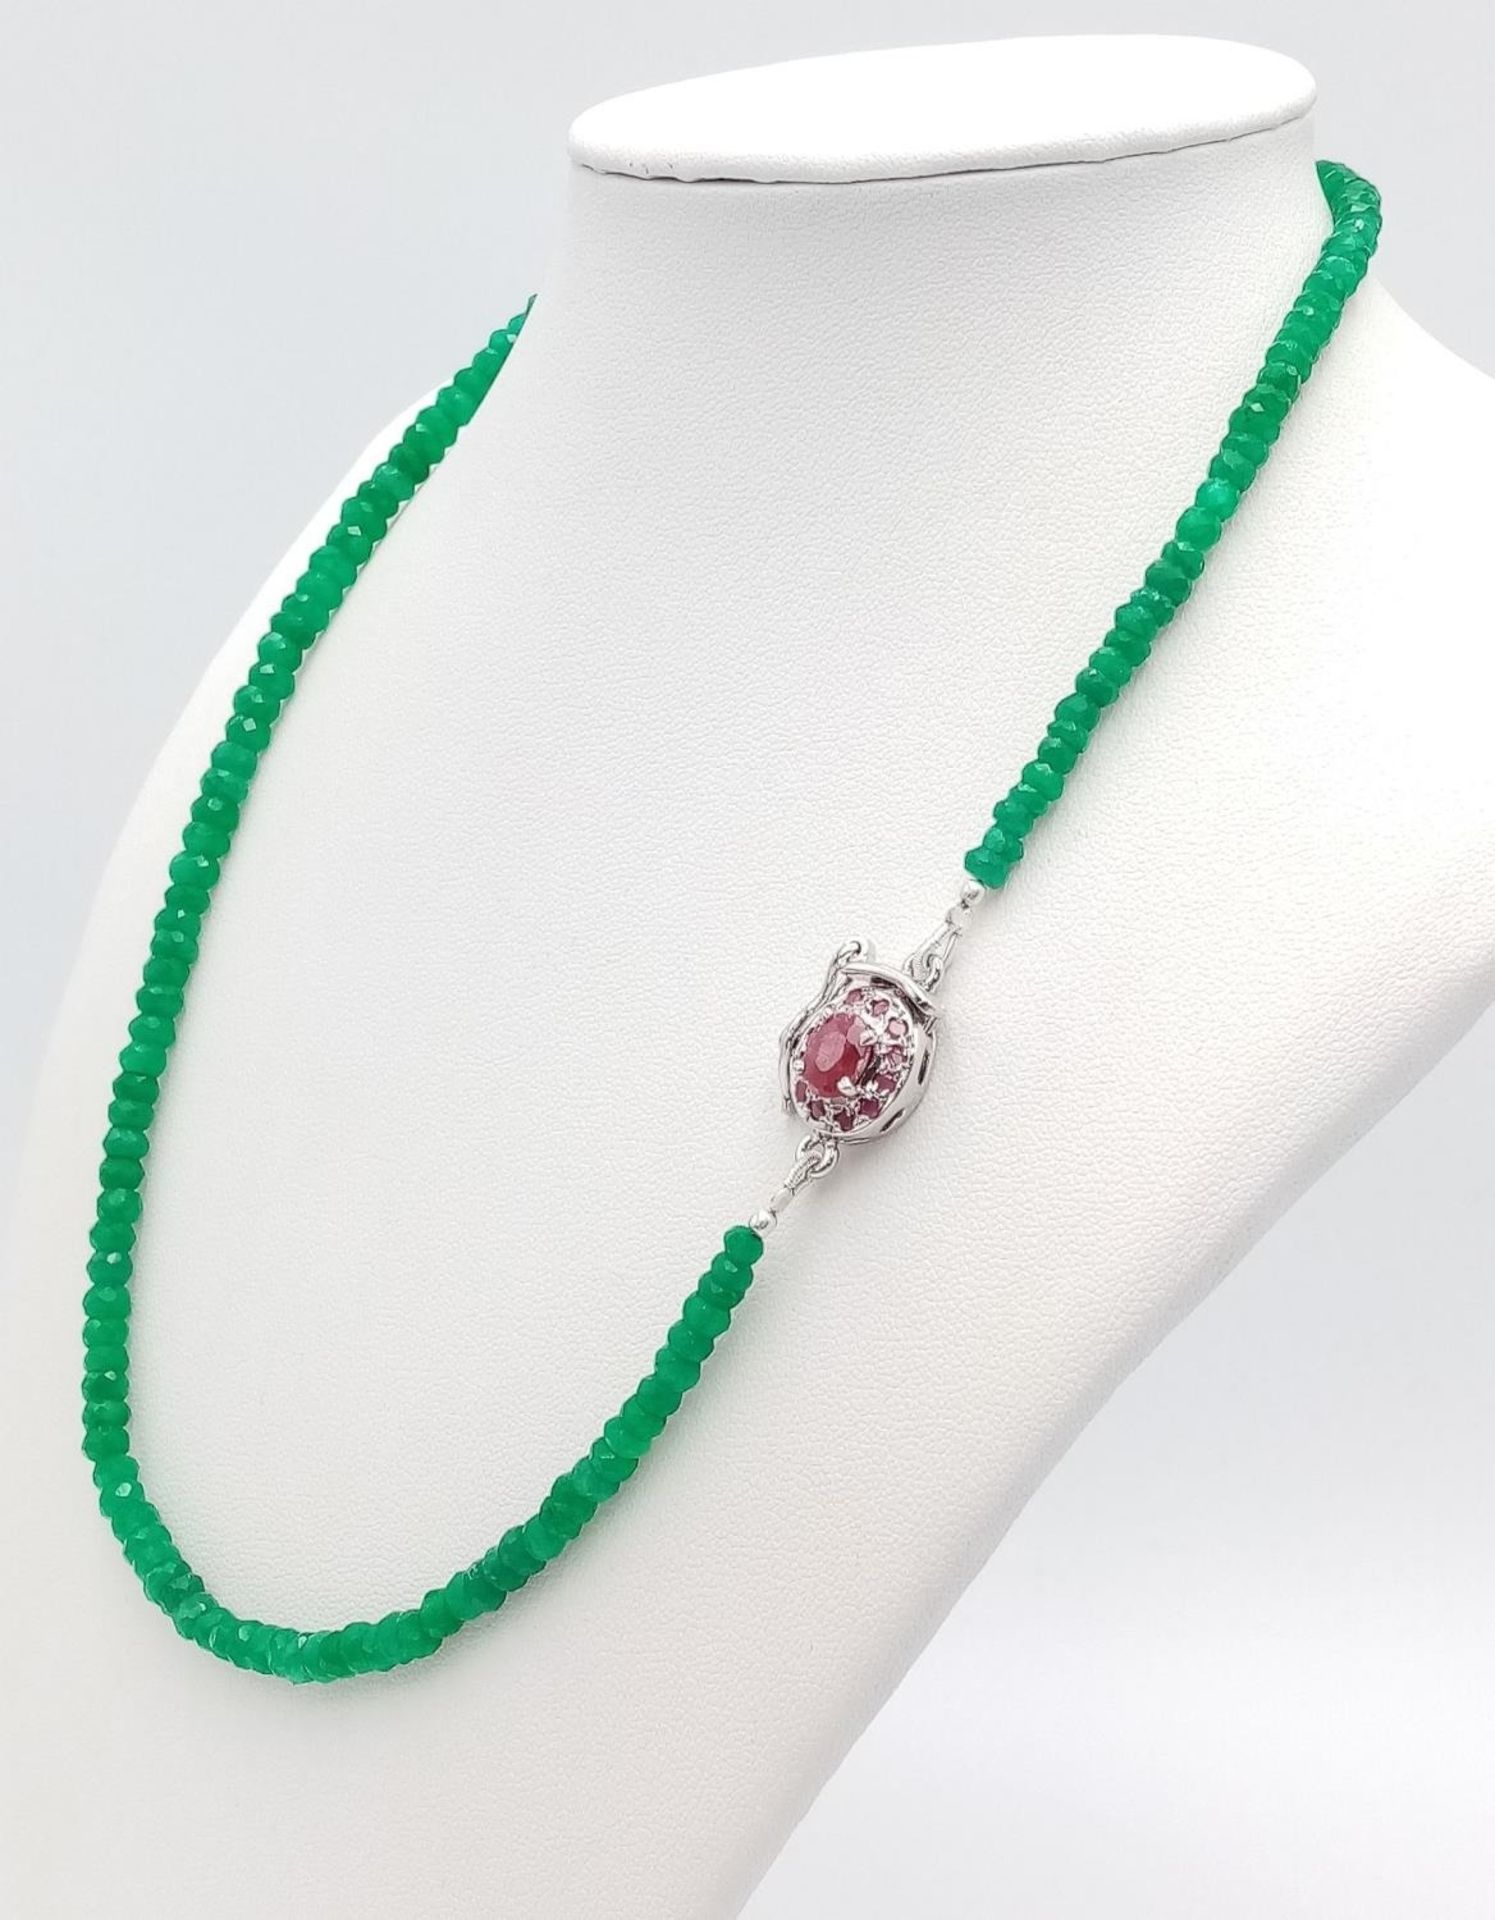 A 95ct Single Strand Emerald Rondelle Necklace with a Ruby and 925 Silver Clasp. 44cm. Ref: Cd-1285 - Image 2 of 5